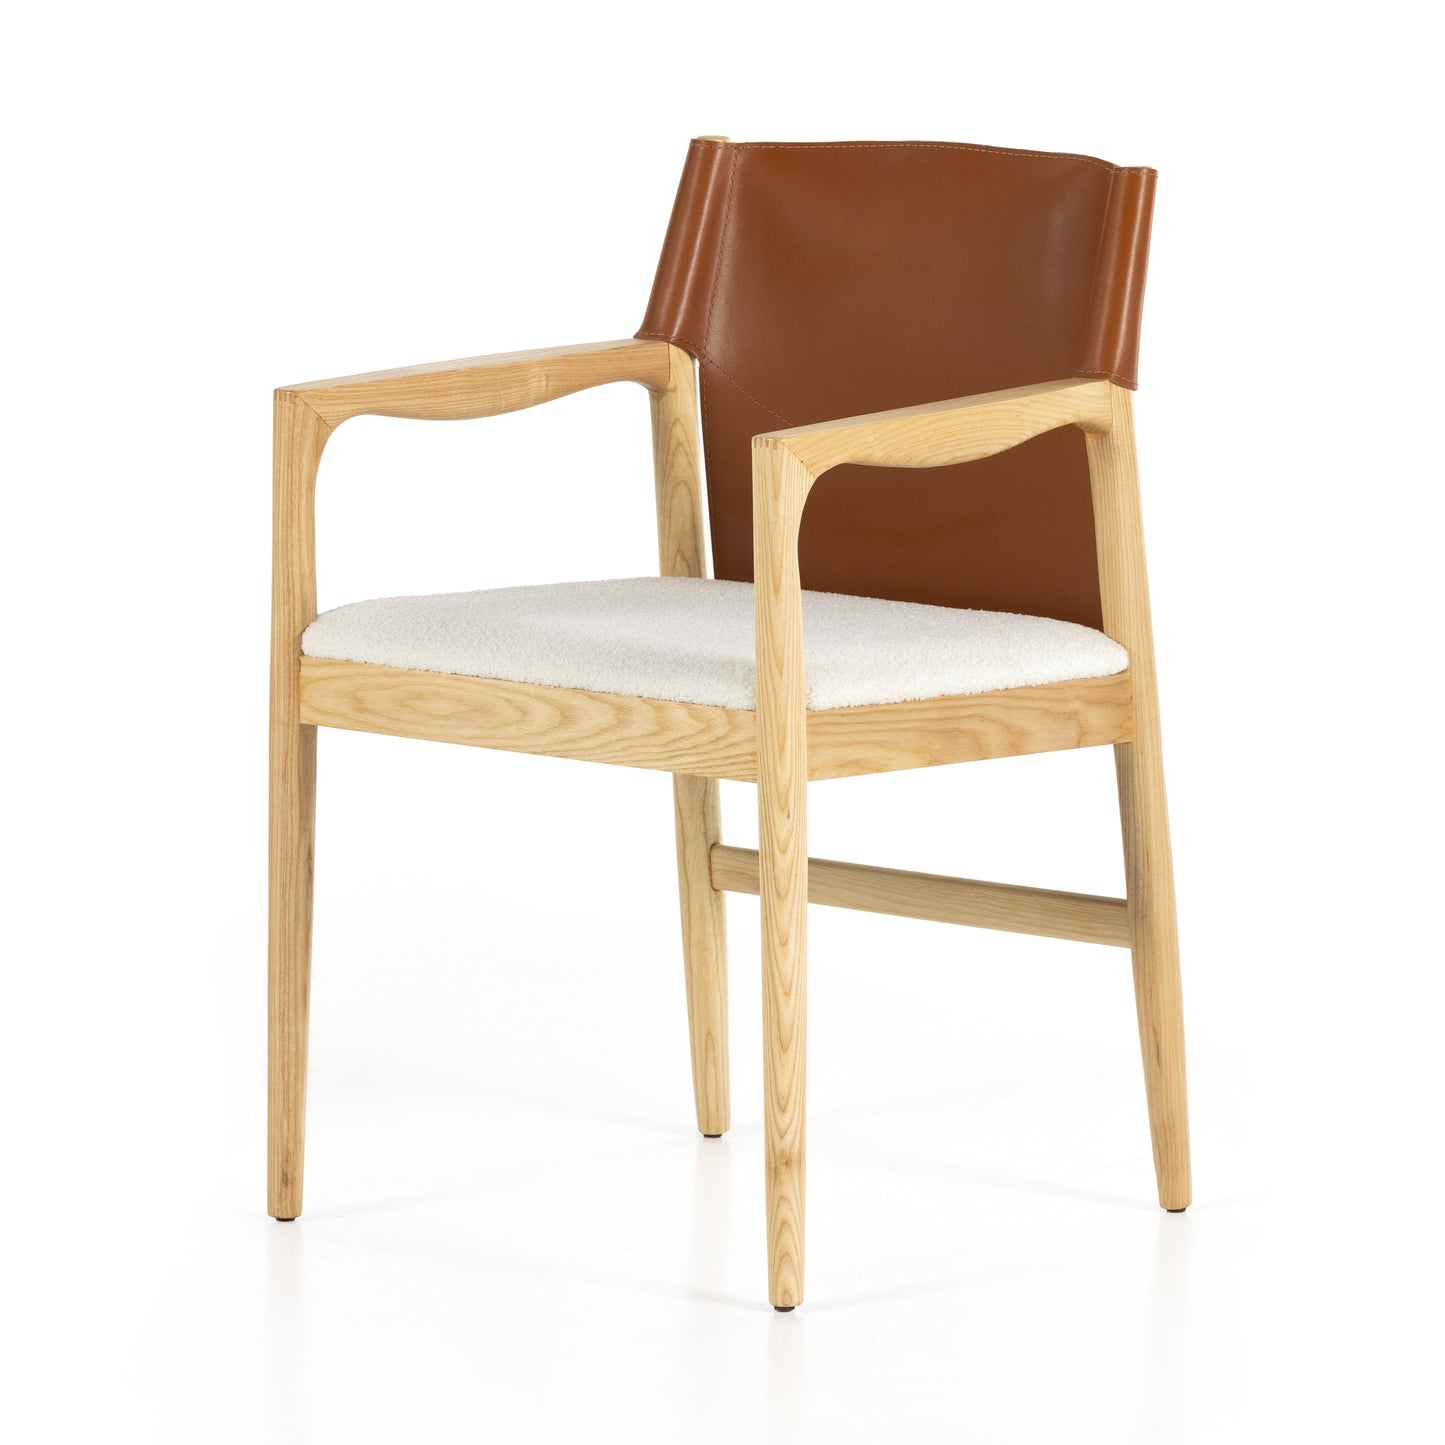 Load image into Gallery viewer, Lulu Dining Chair-Saddle Leather Blends Dining Chair Four Hands     Four Hands, Burke Decor, Mid Century Modern Furniture, Old Bones Furniture Company, Old Bones Co, Modern Mid Century, Designer Furniture, https://www.oldbonesco.com/
